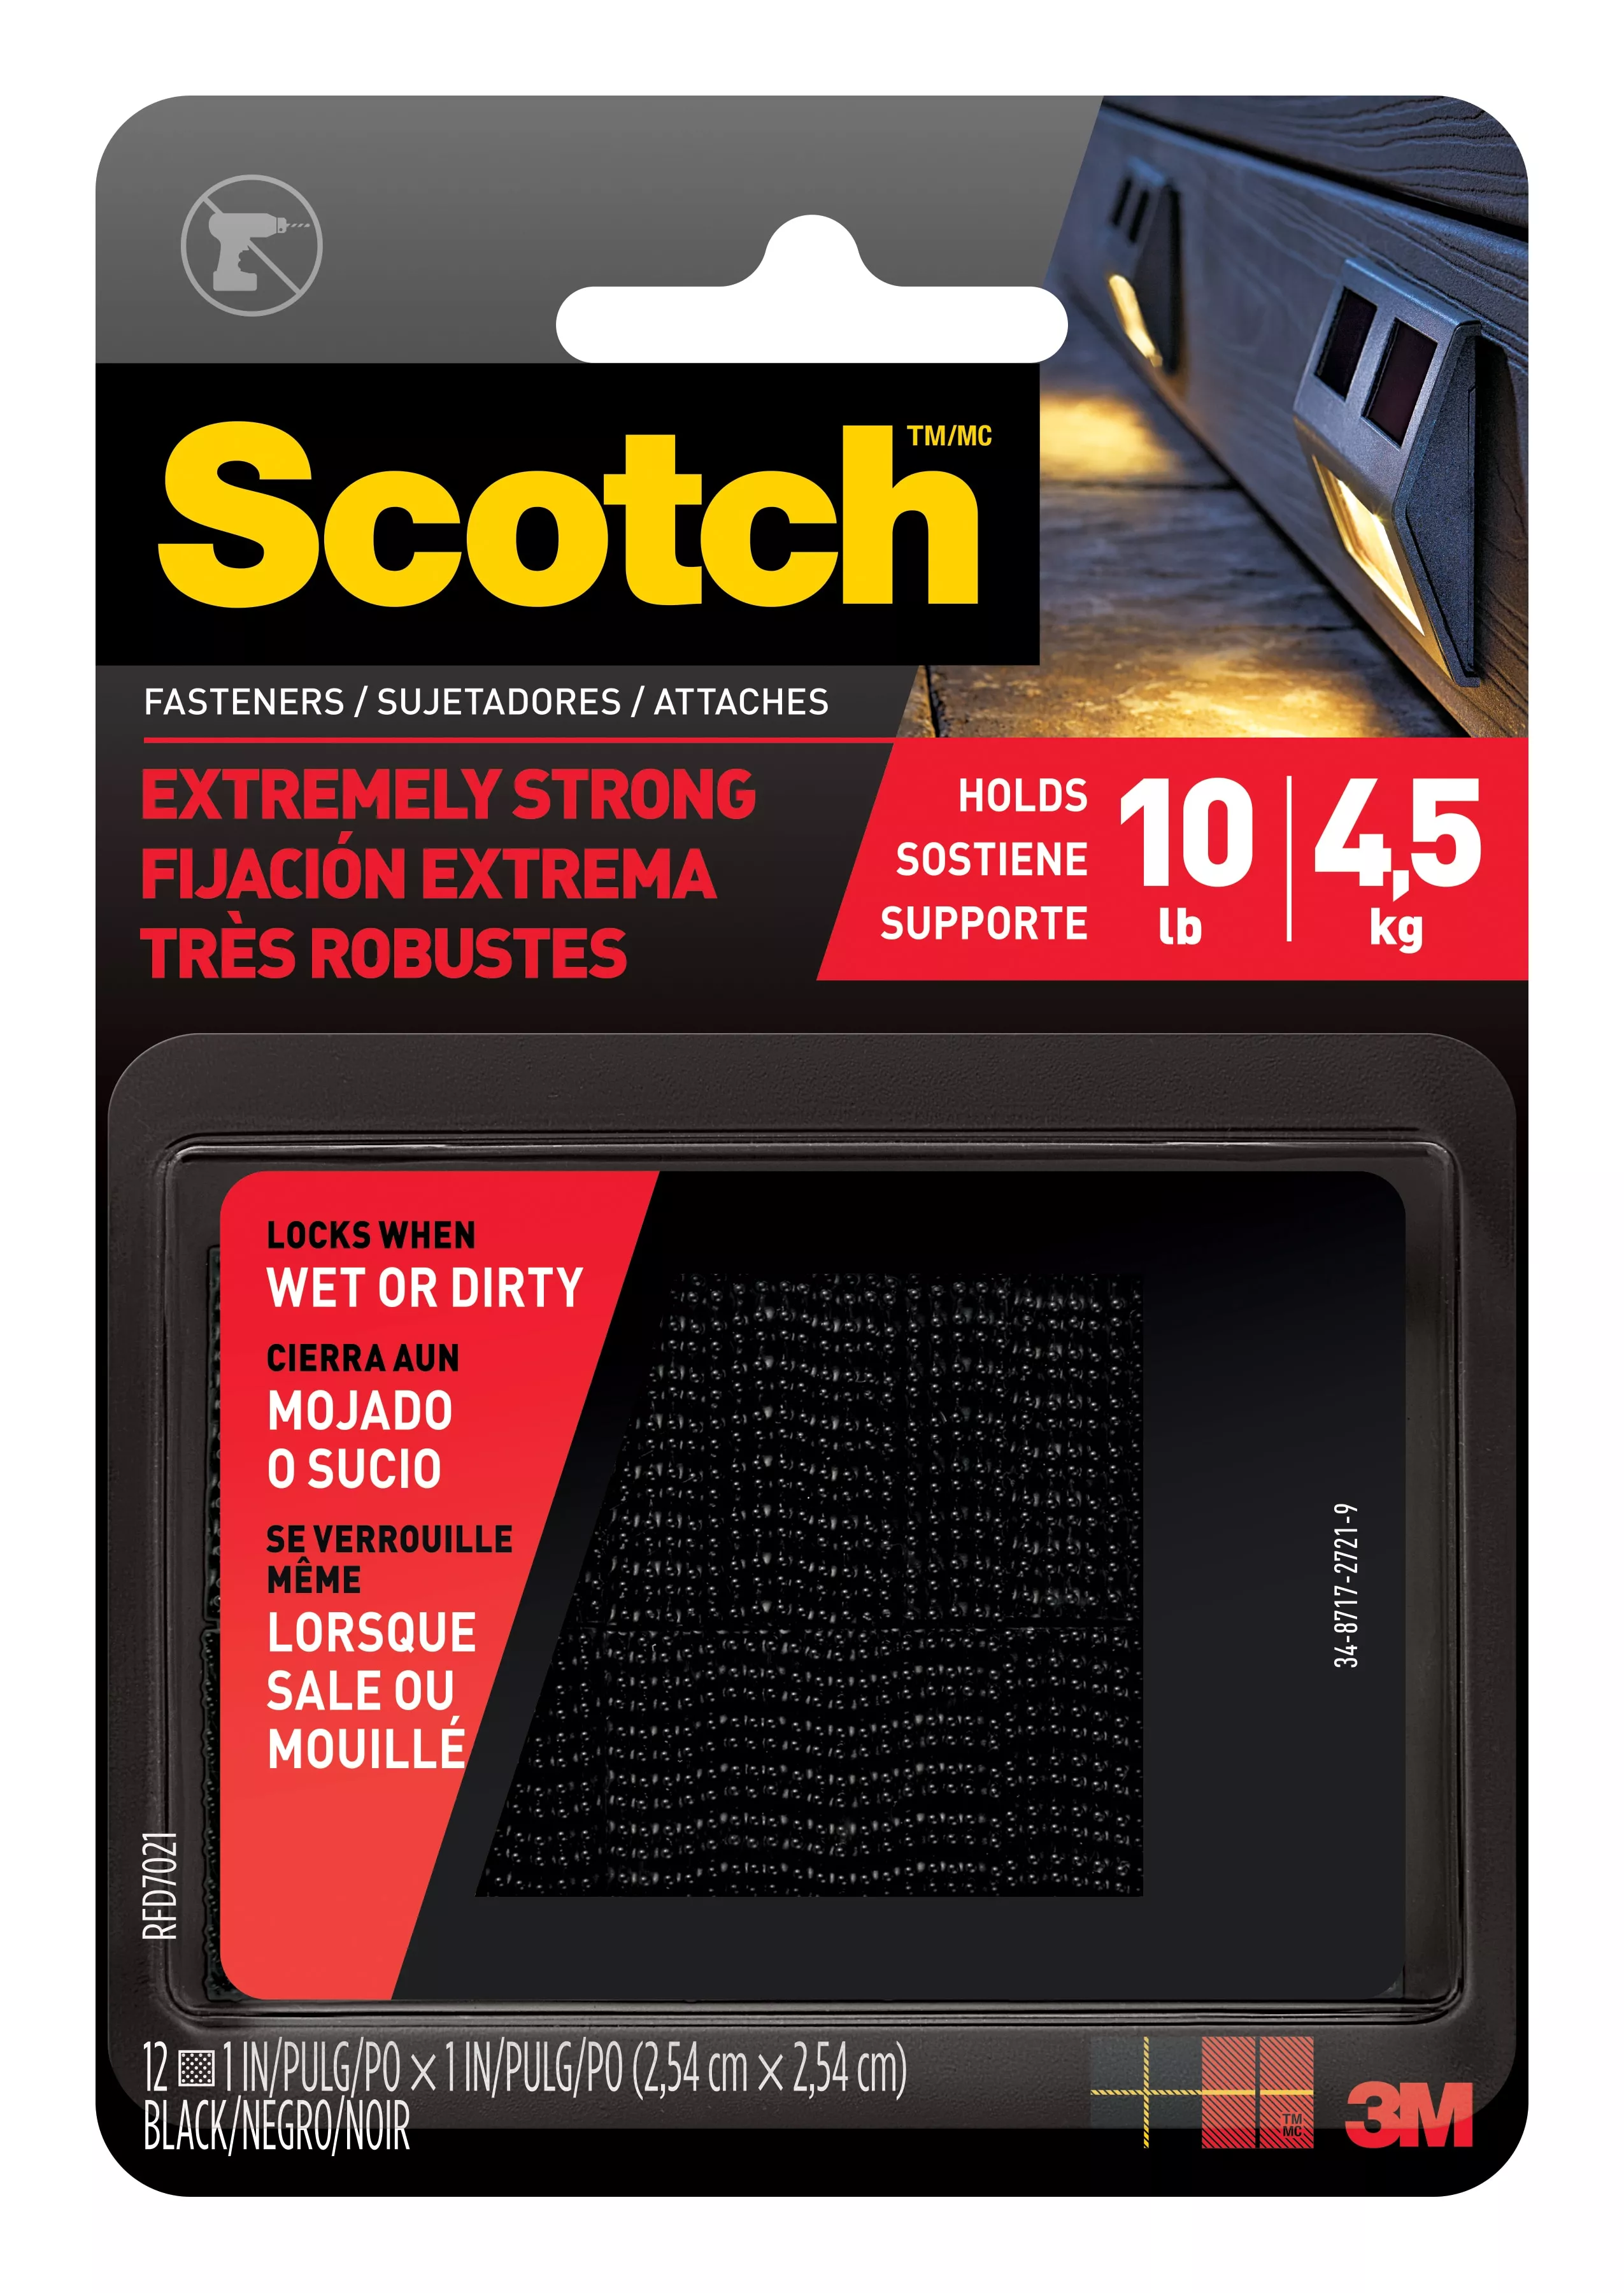 Scotch™ Extreme Fasteners RFD7021, 1 in x 1 in (25,4 mm x 25,4 mm) Black
12 Squares (6sets).